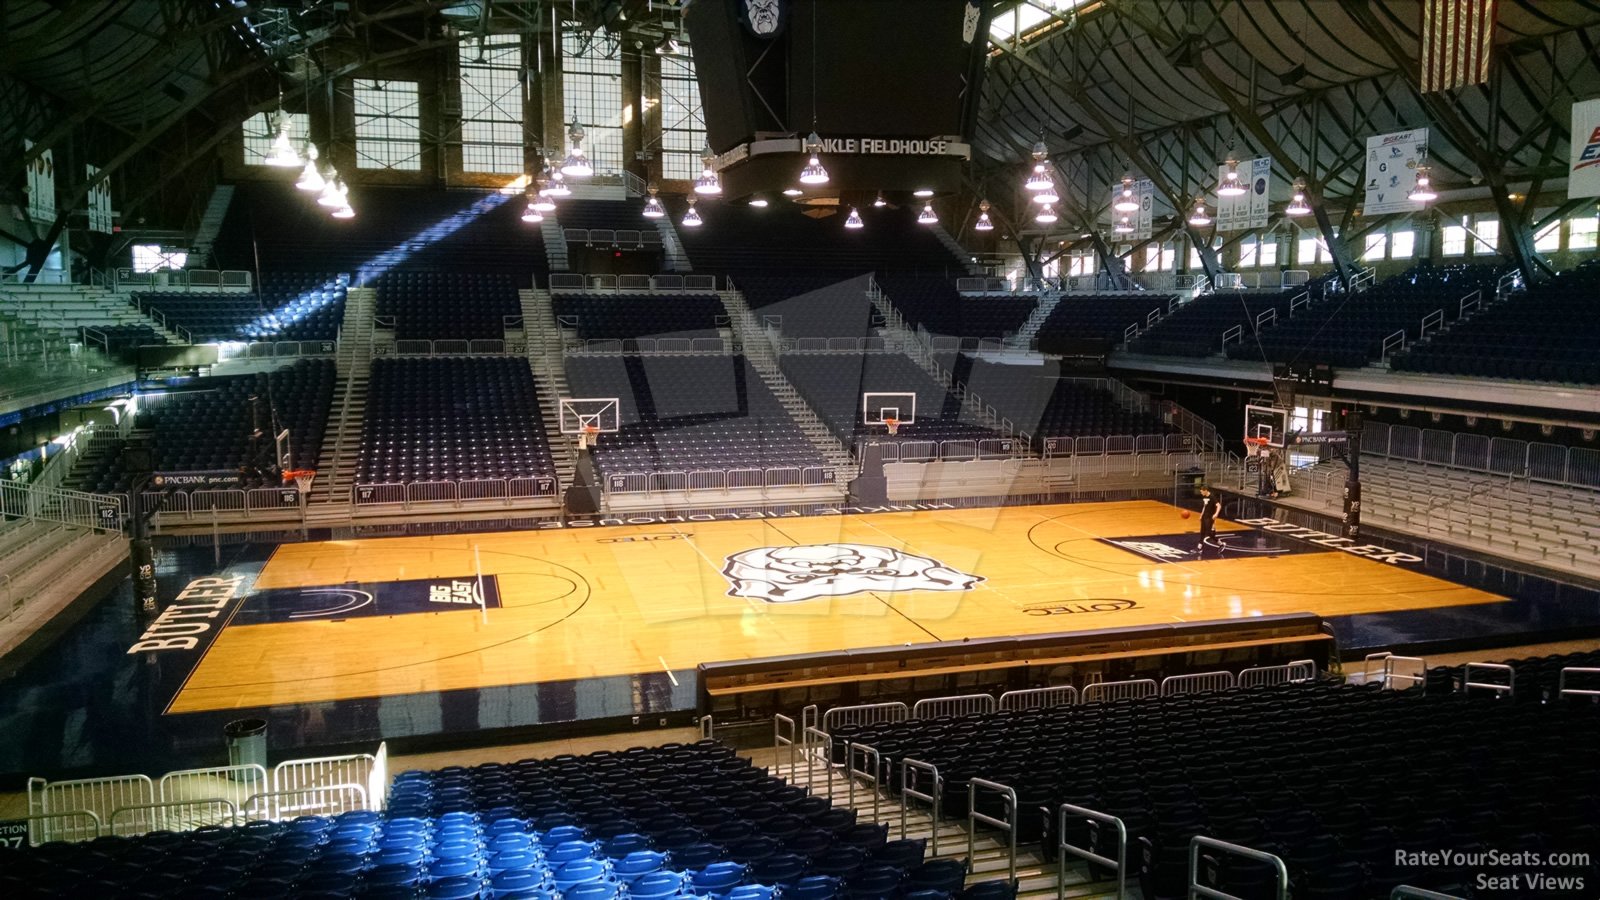 section 207, row 3 seat view  - hinkle fieldhouse